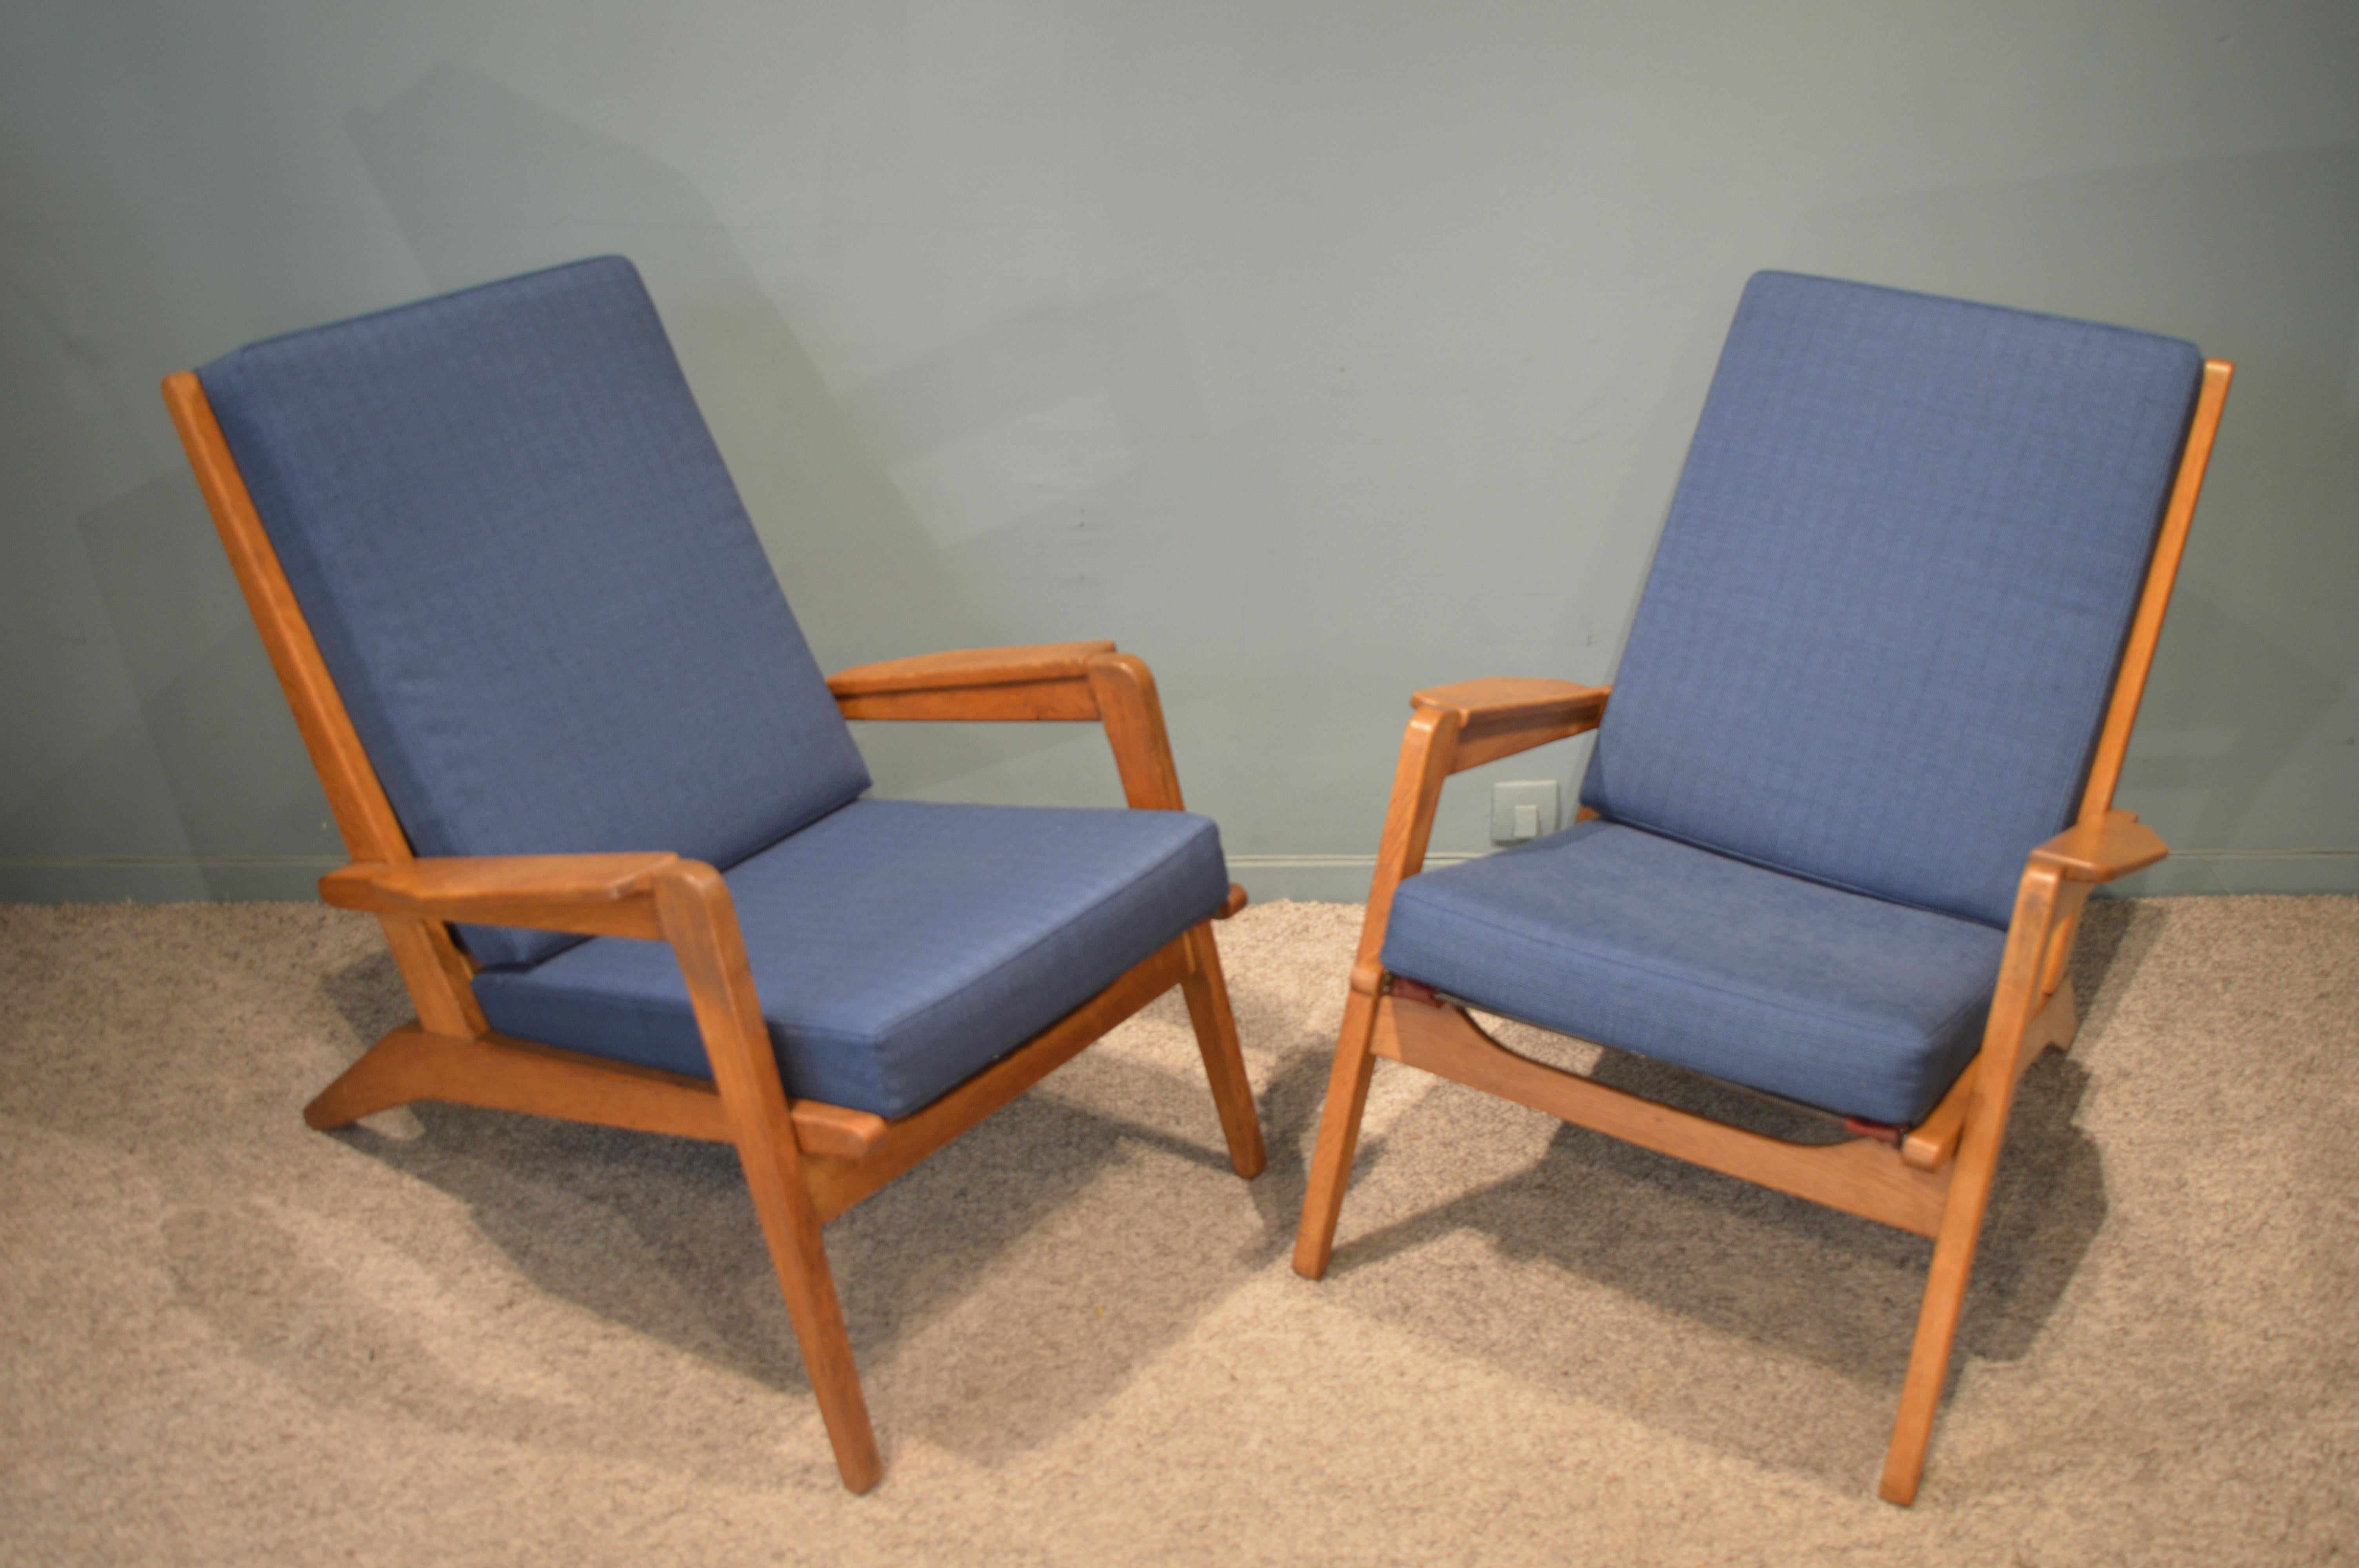 Pair of armchairs in oakwood model FS 105 by Pierre Guariche.
French work, circa 1950.
Re-upholstered with fabric by Maison Lelièvre, Paris.